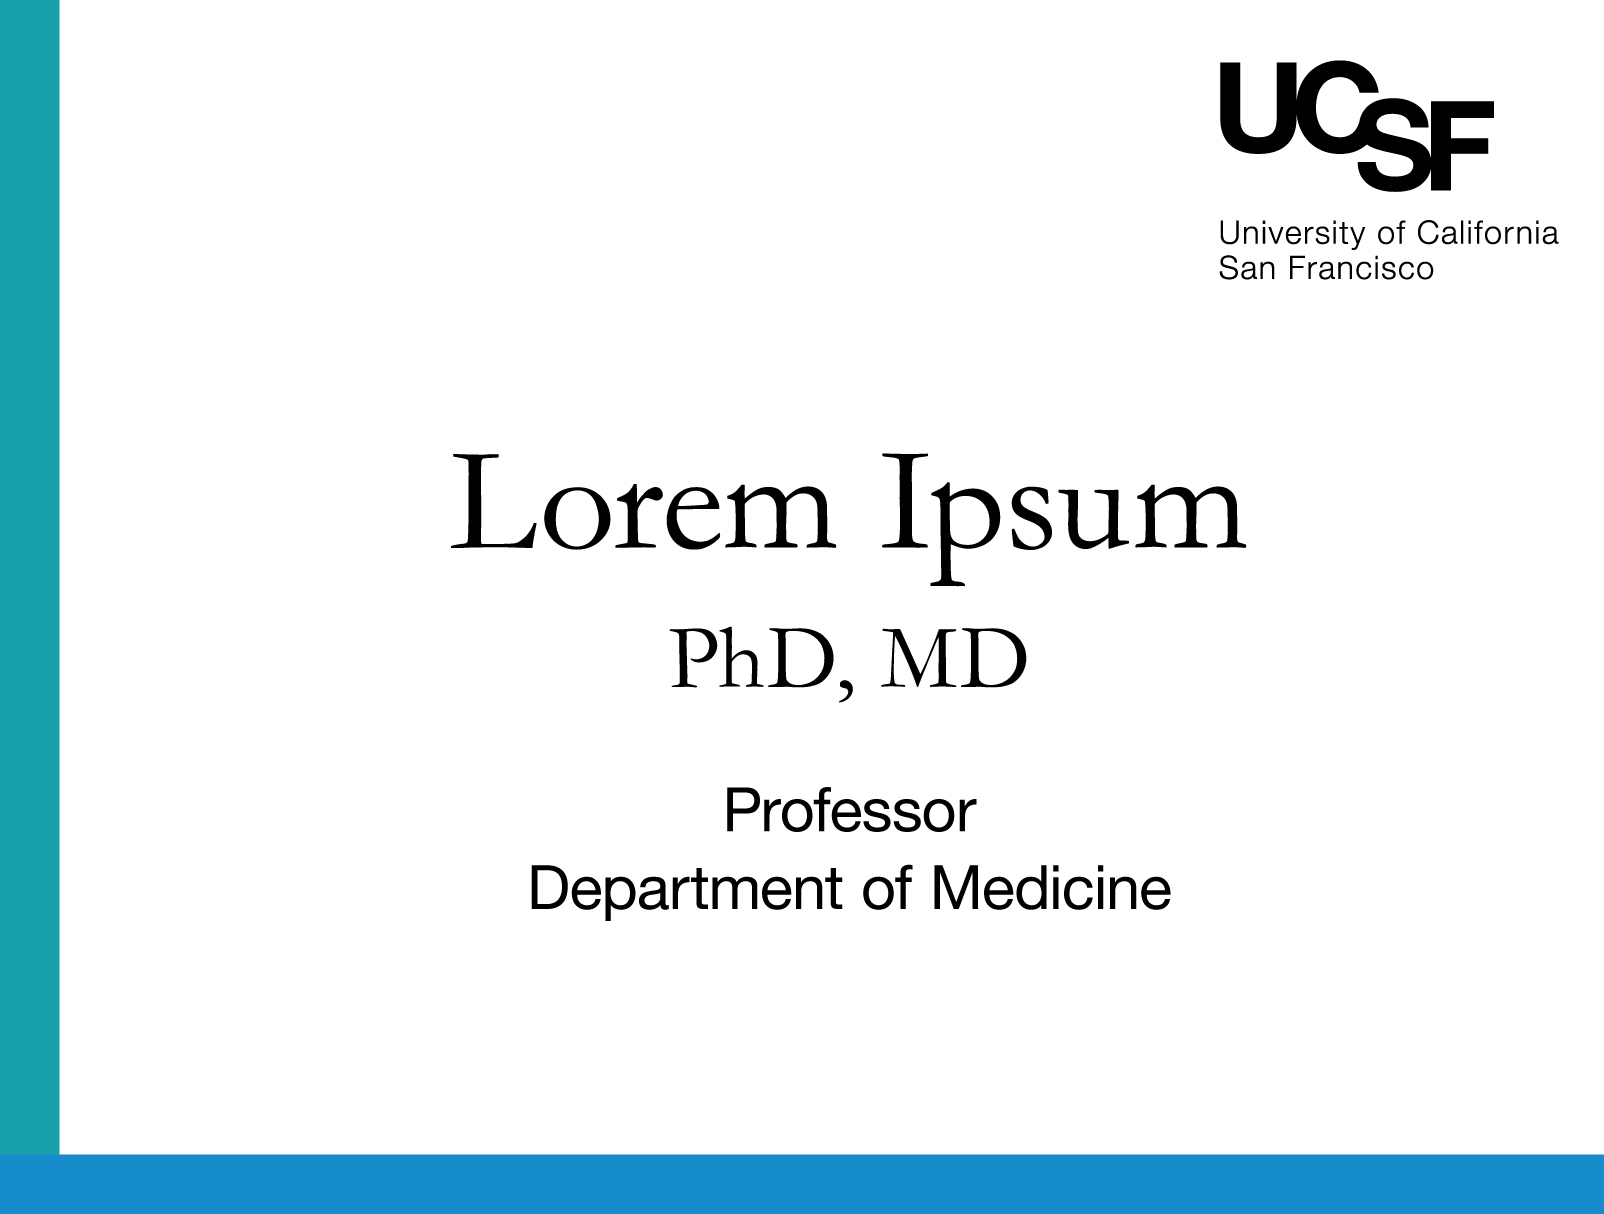 ucsf name badge with signature logo